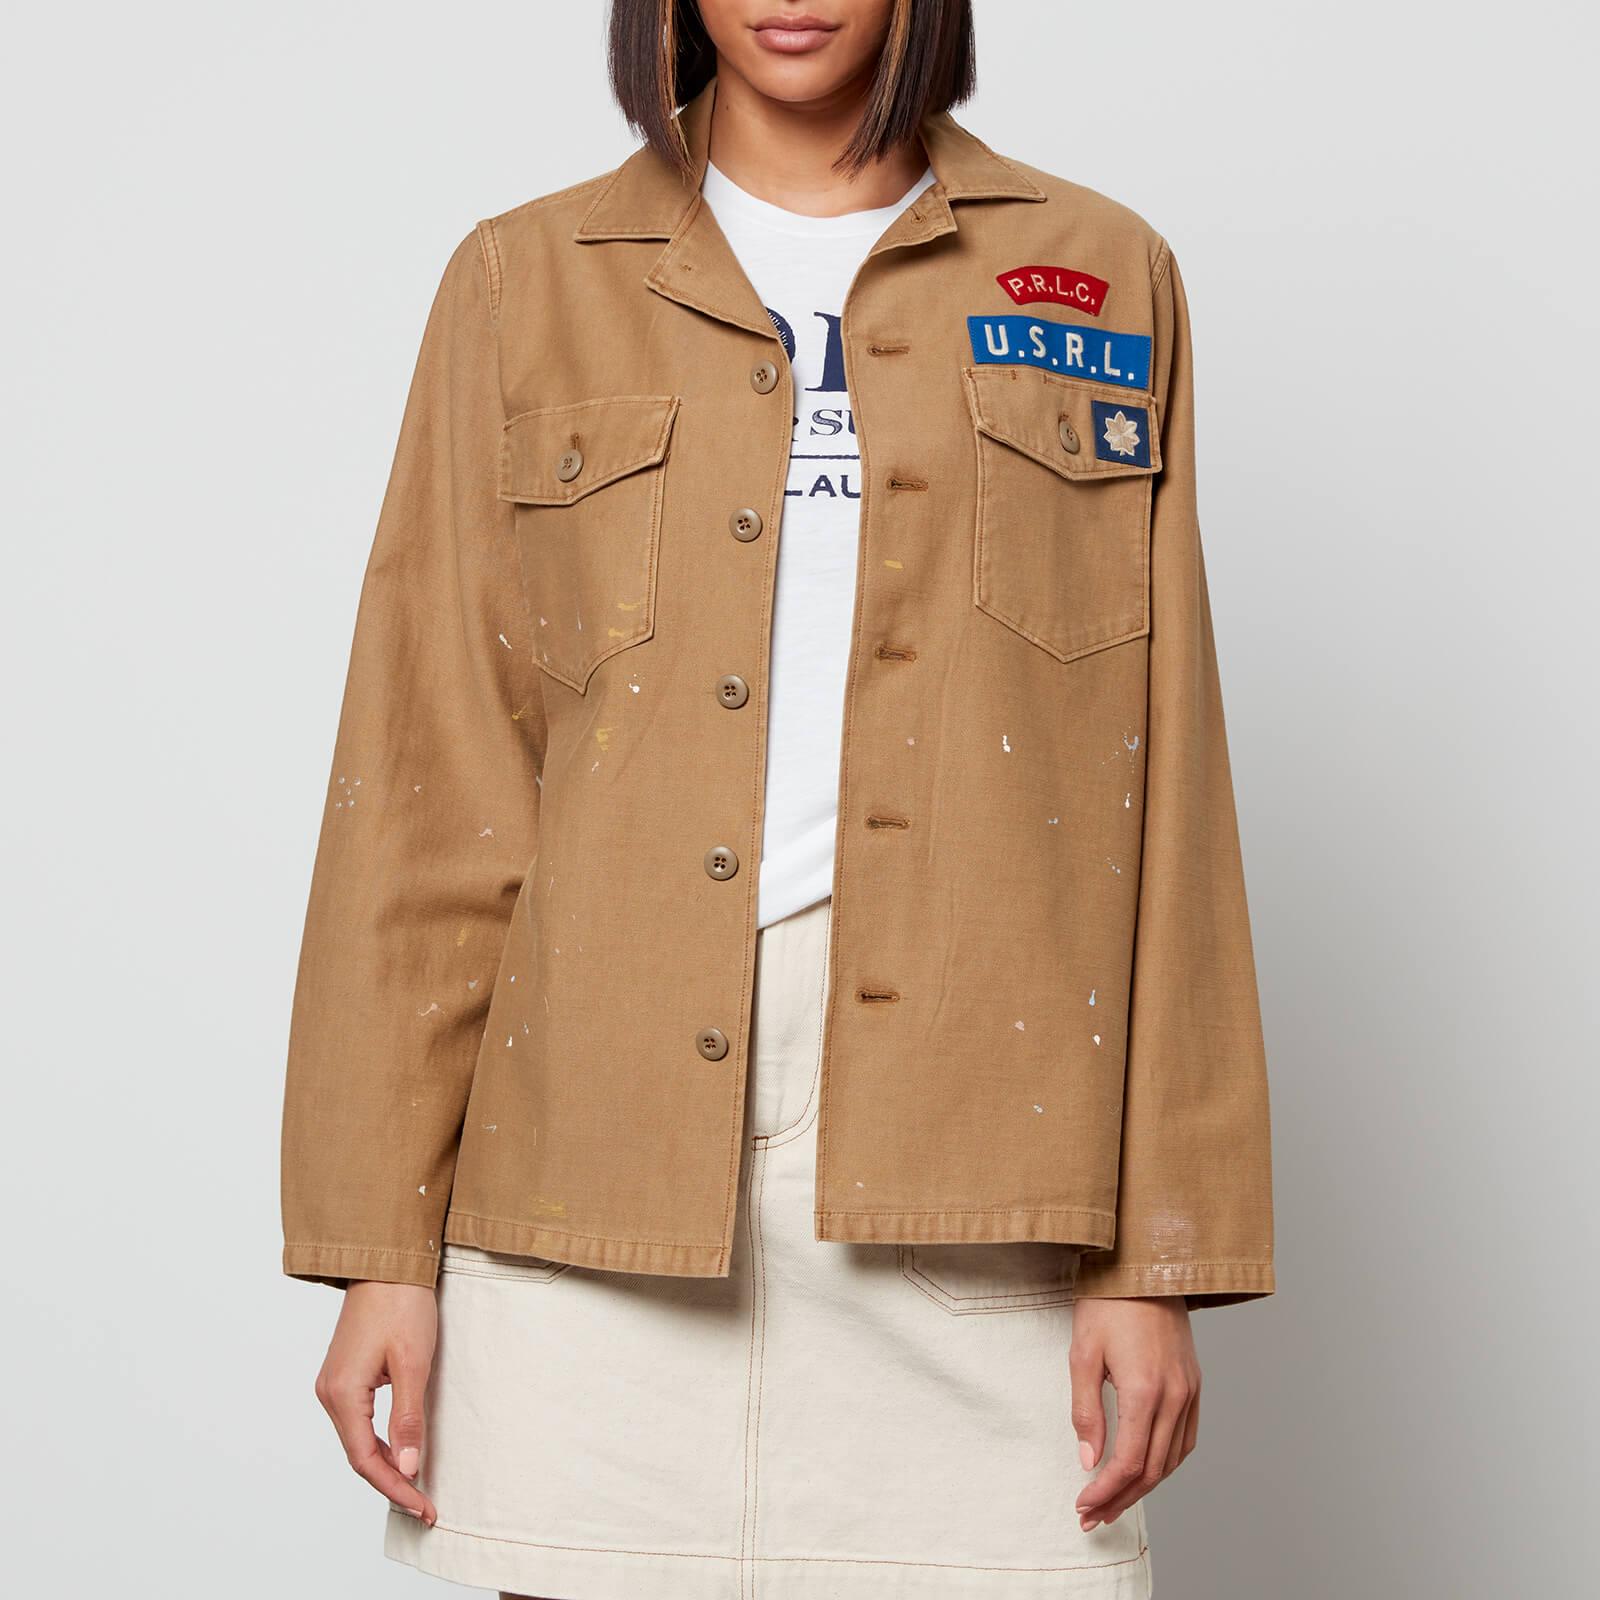 Polo Ralph Lauren Utility Shirt Jacket in Natural | Lyst